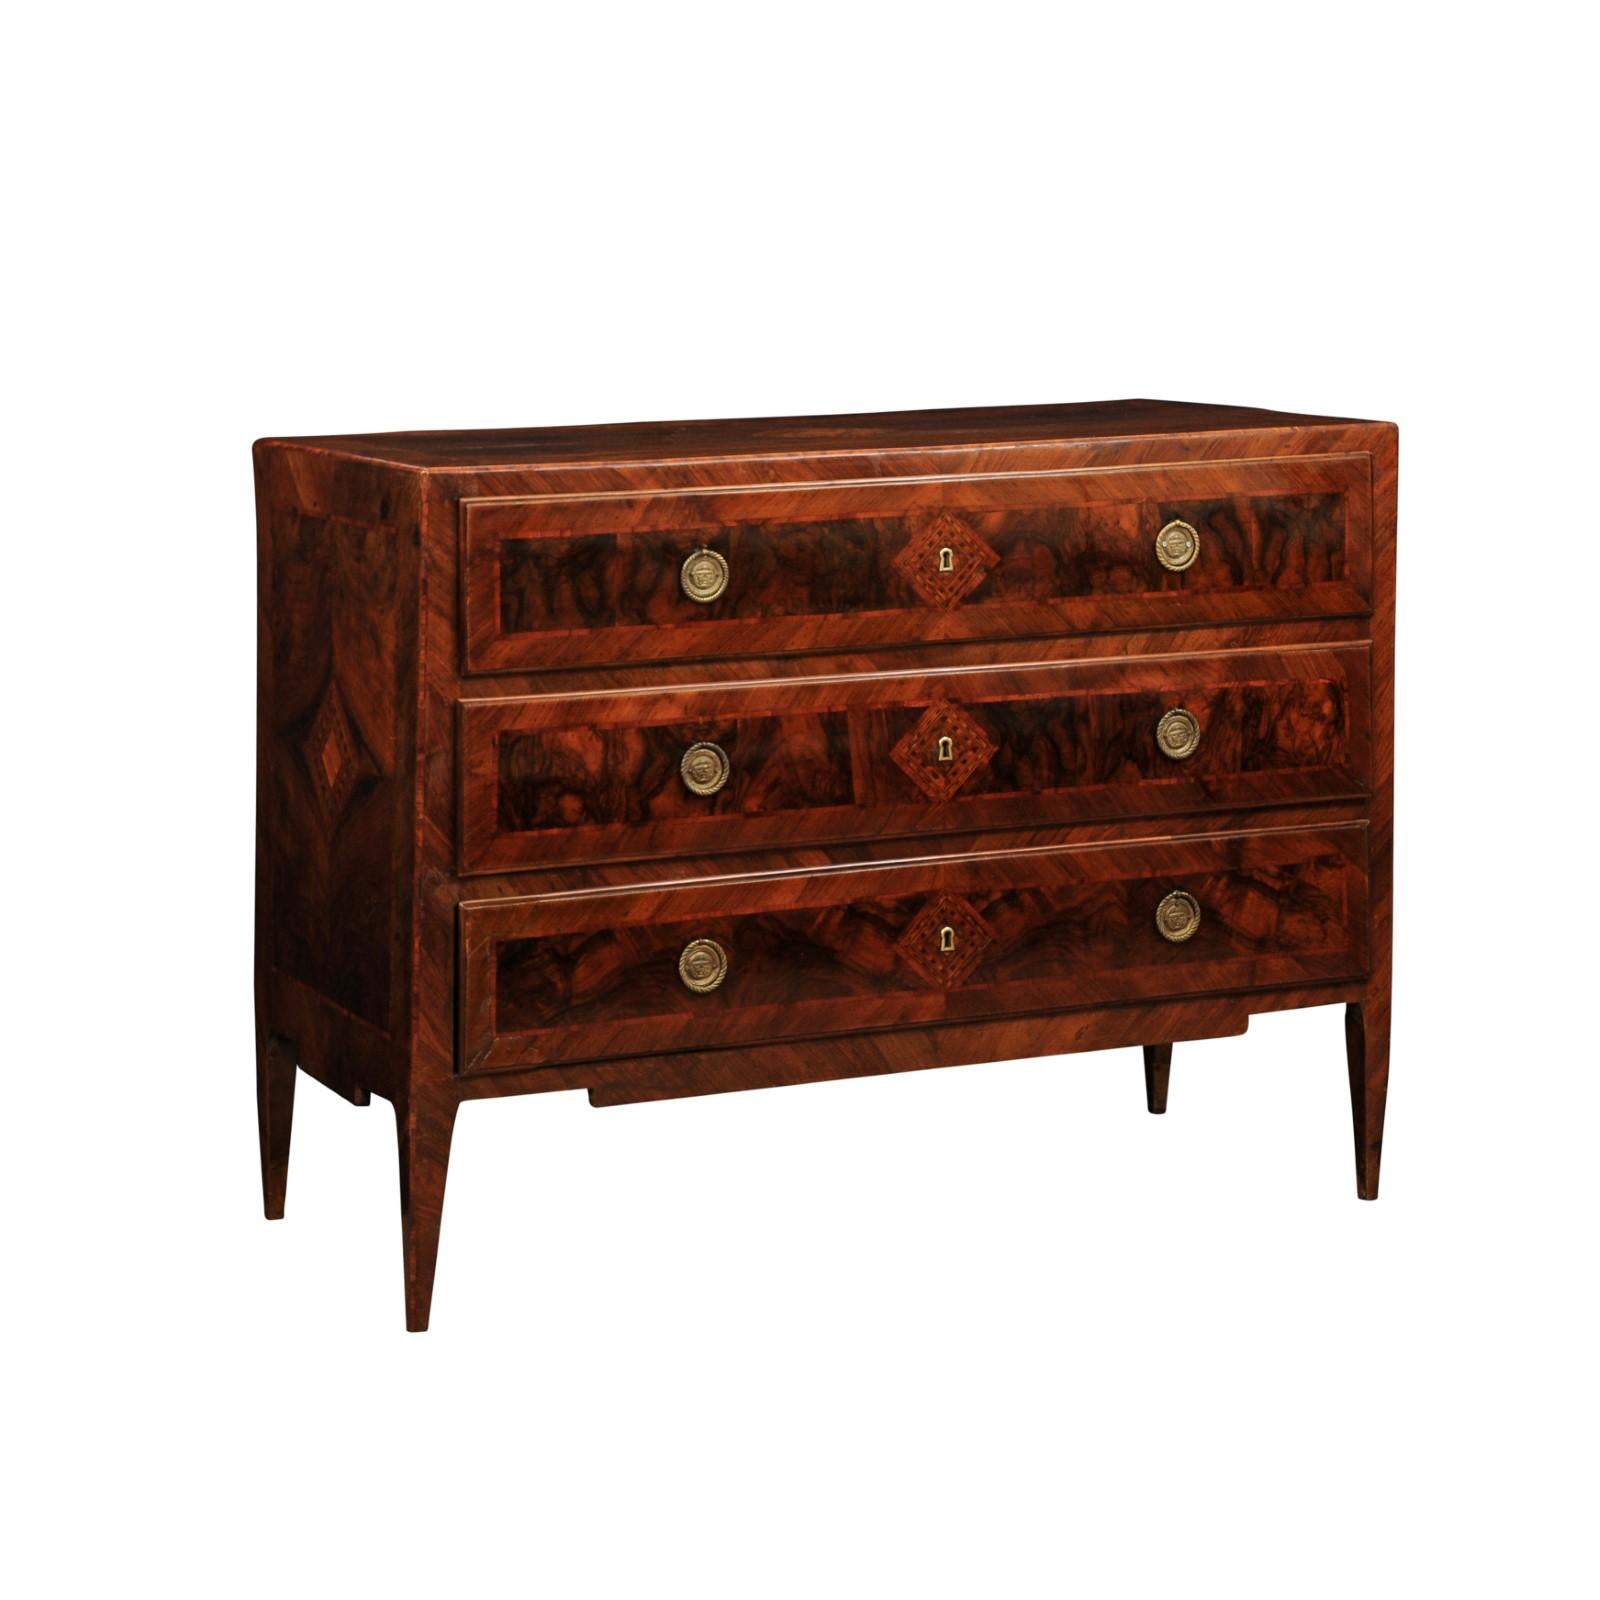 Large Late 18th Century Italian Neoclassical Walnut Commode with 3 Drawers For Sale 12